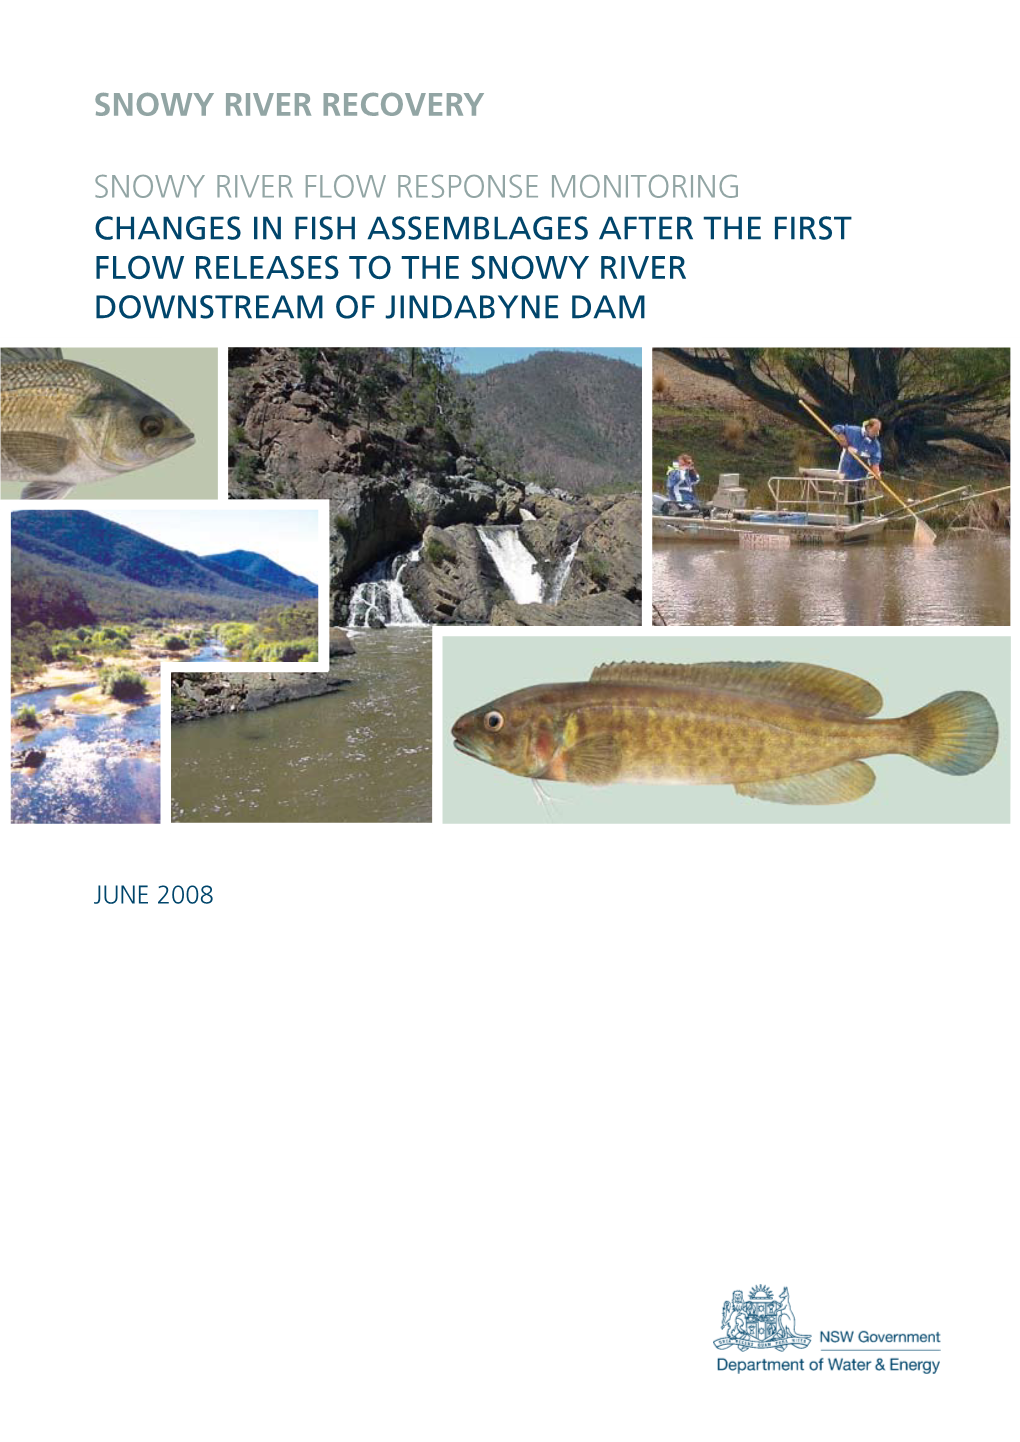 Snowy River Recovery: Changes in Fish Assemblages After the First Flow Releases to the Snowy River Downstream of Jindabyne Dam